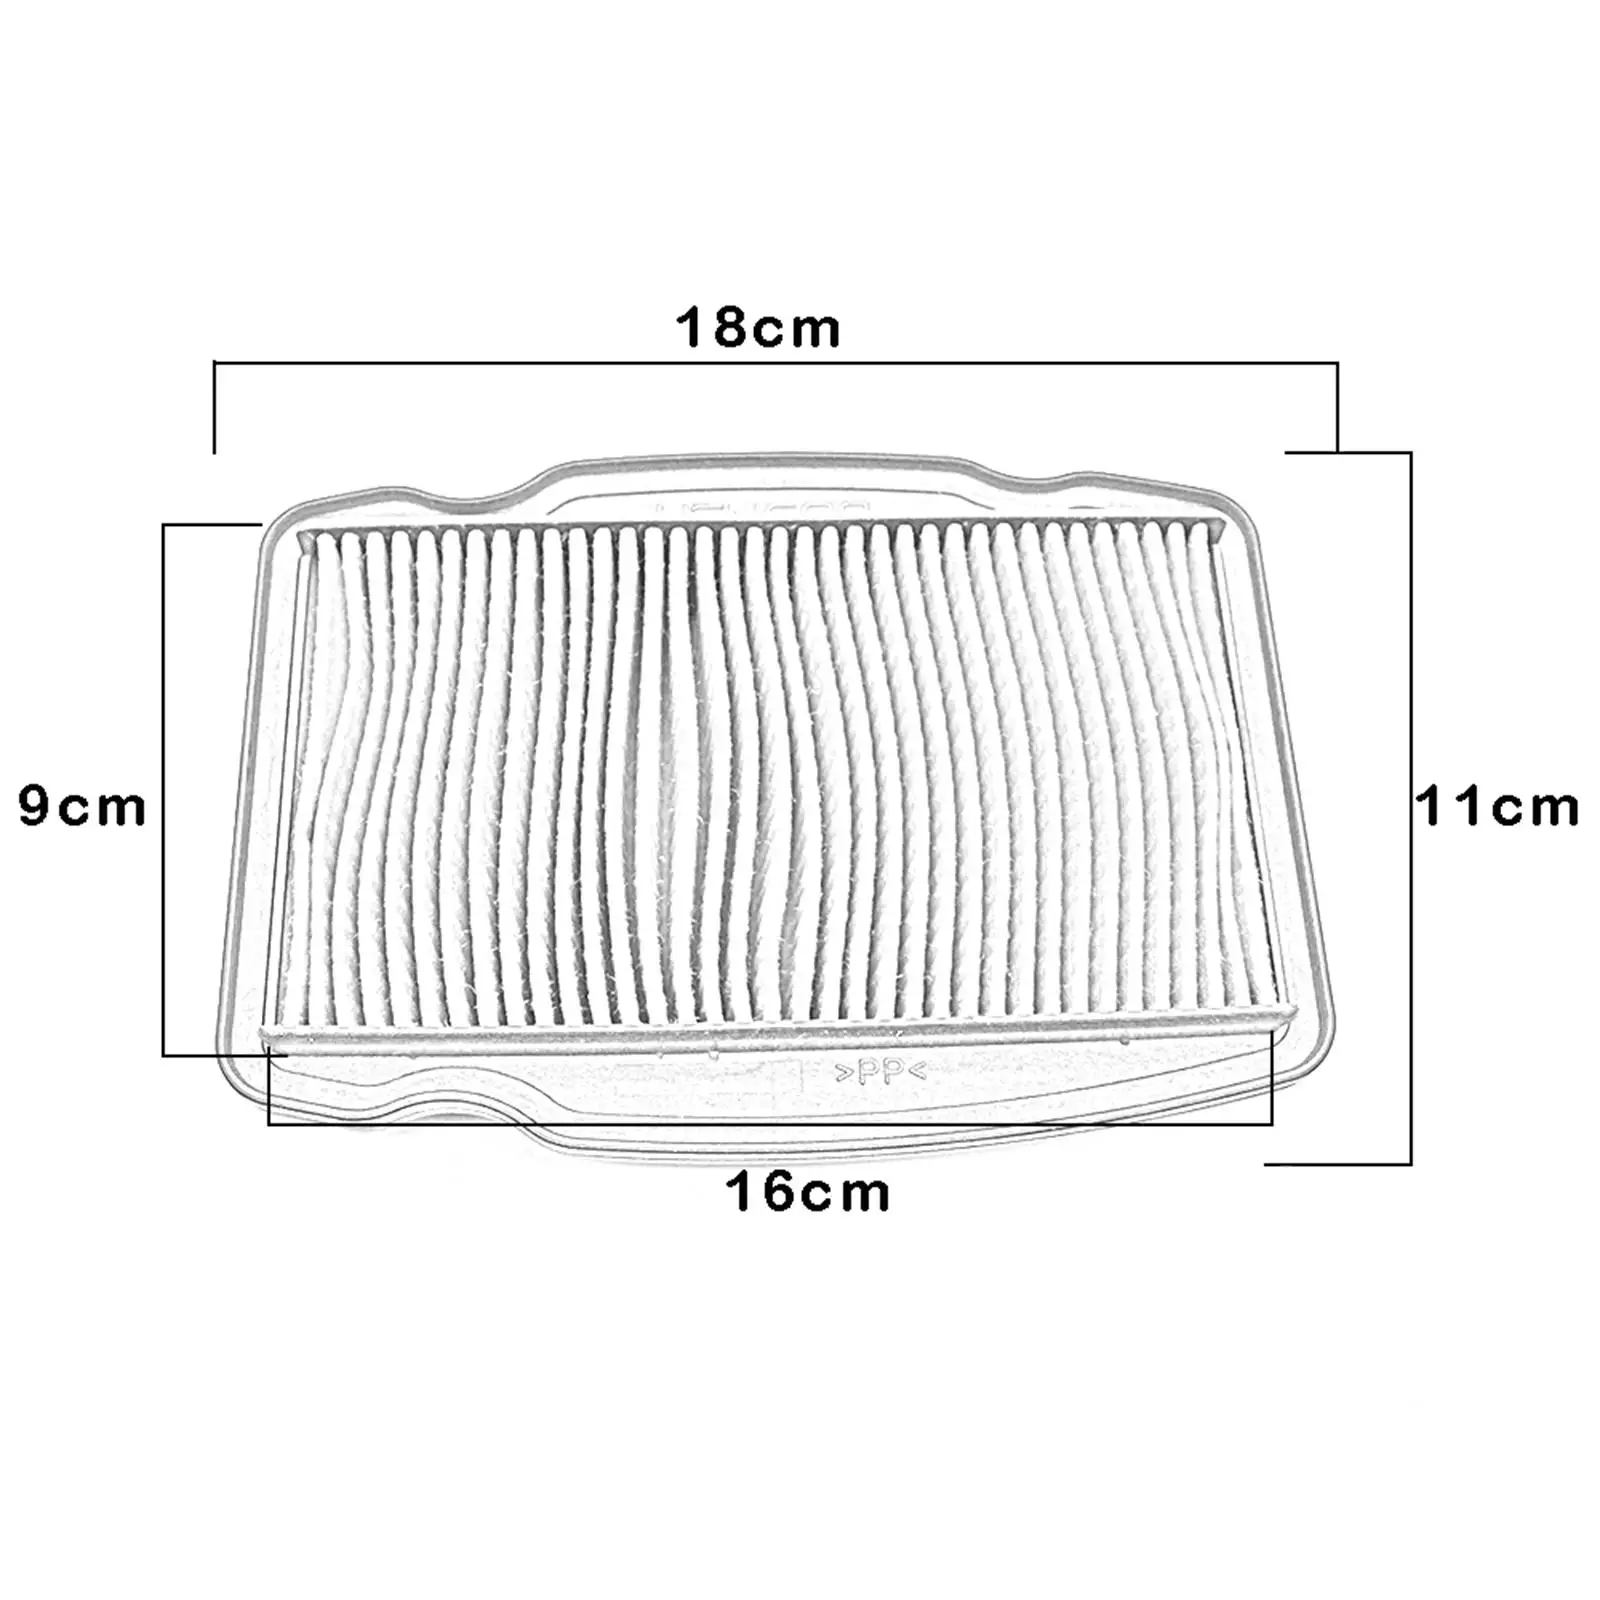 Air Filter Motorcycle Air Intake Filter Fit for x